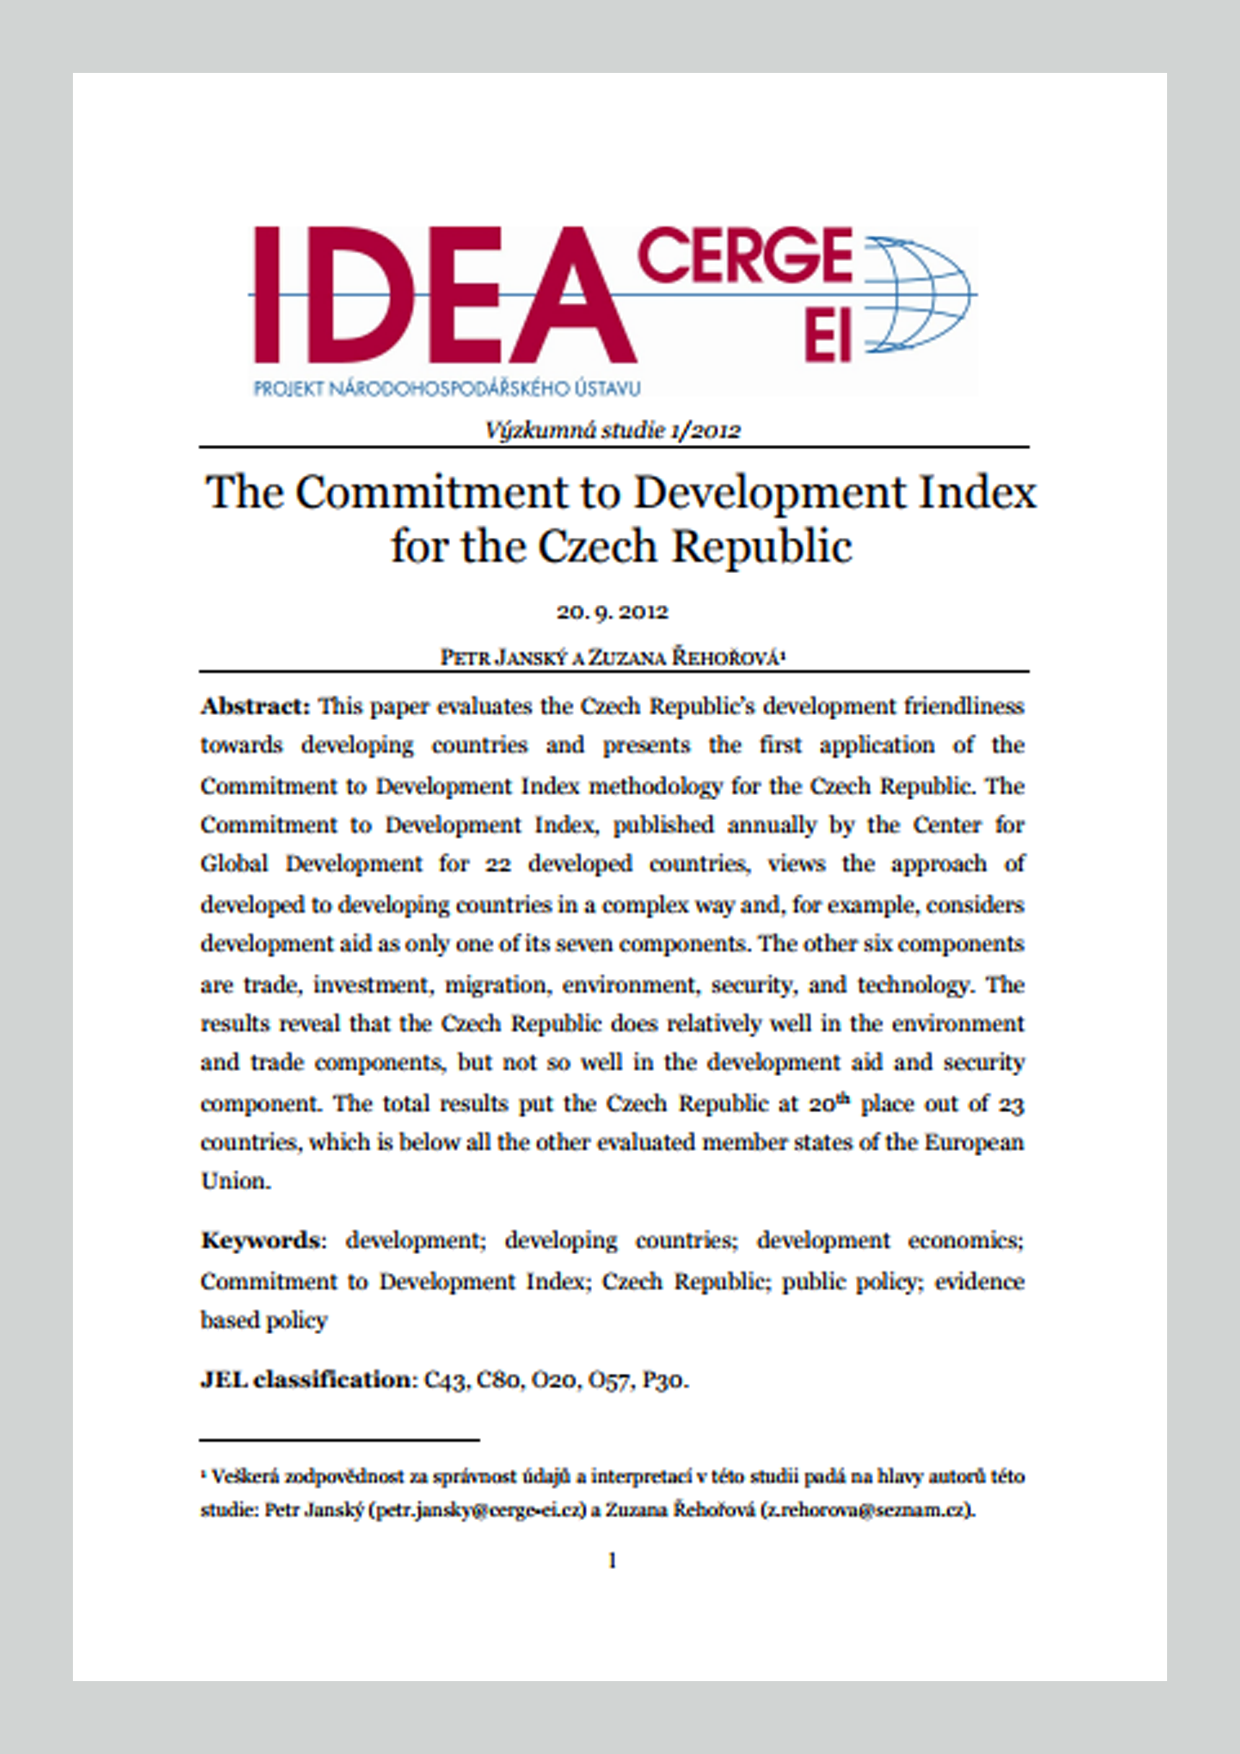 The Commitment to Development Index for the Czech Republic